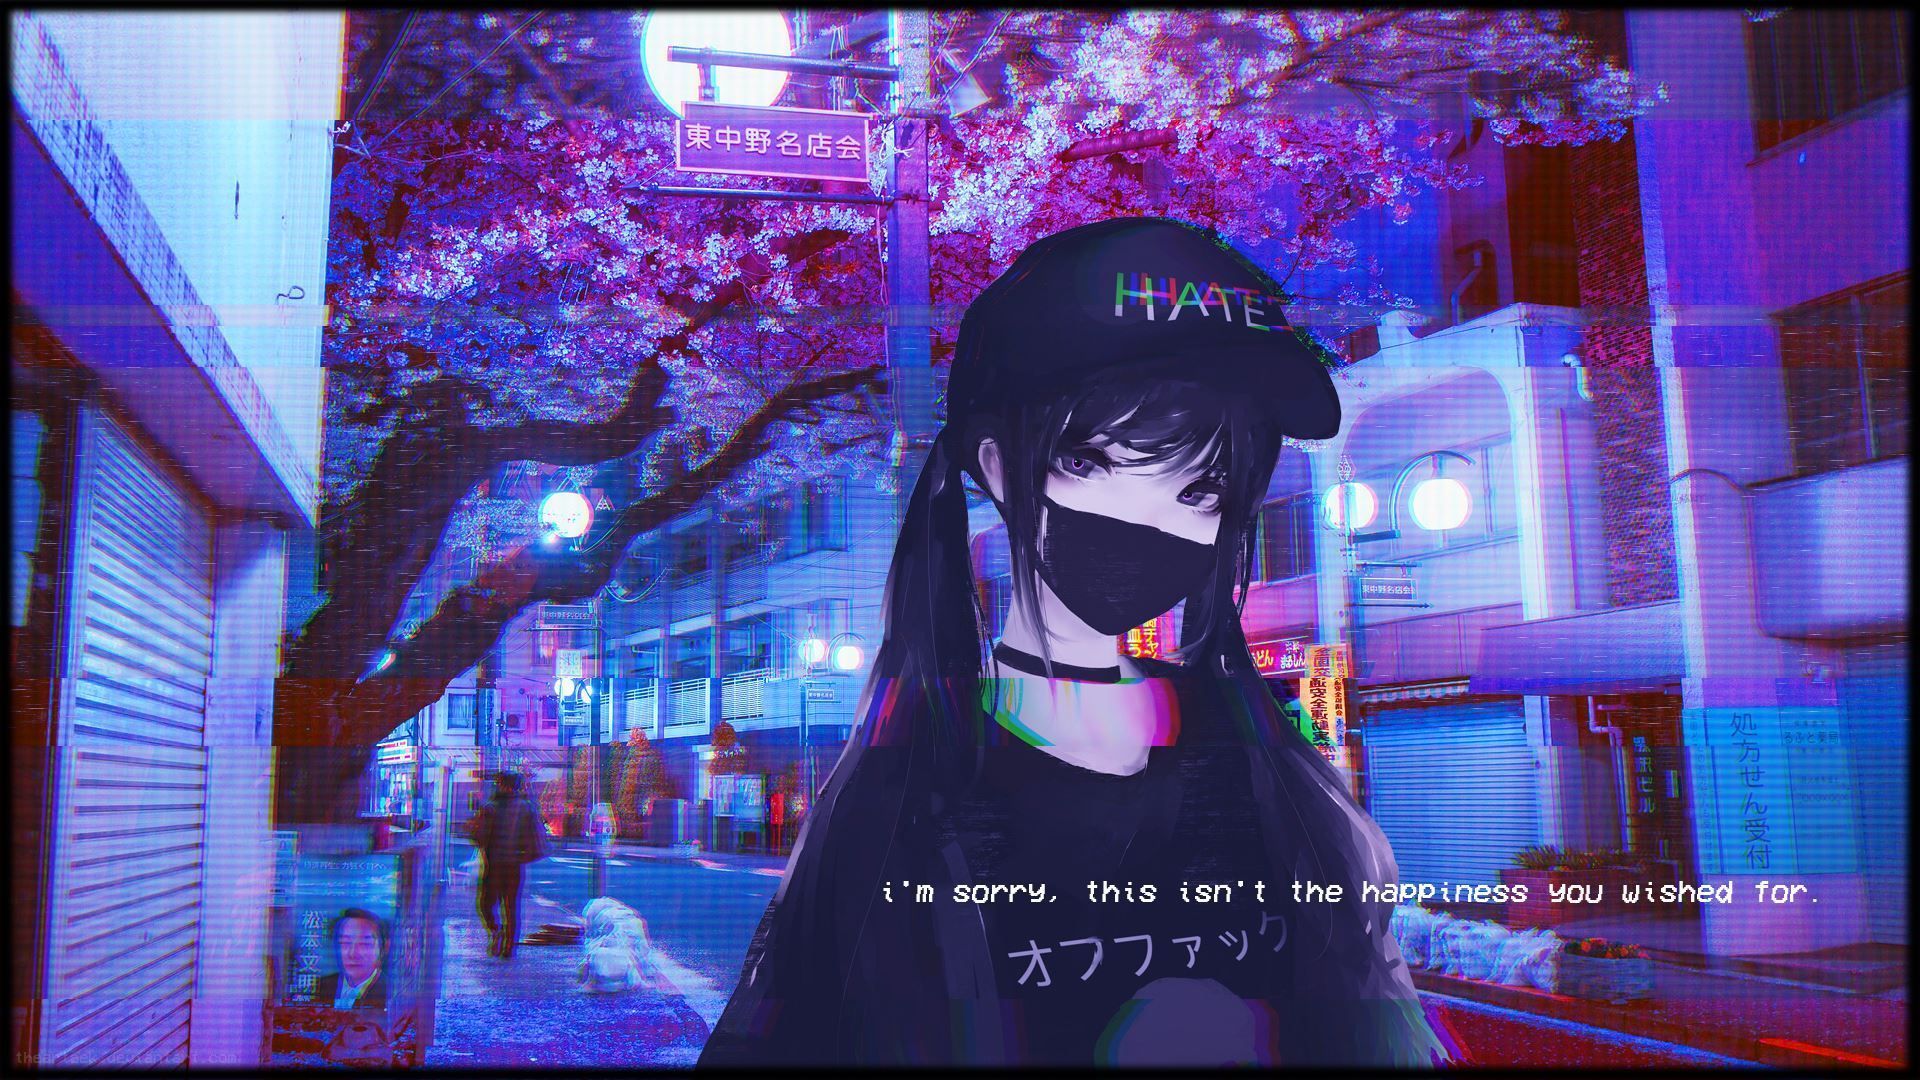 Awesome Dark Anime Glitch Wallpaper. Aesthetic anime